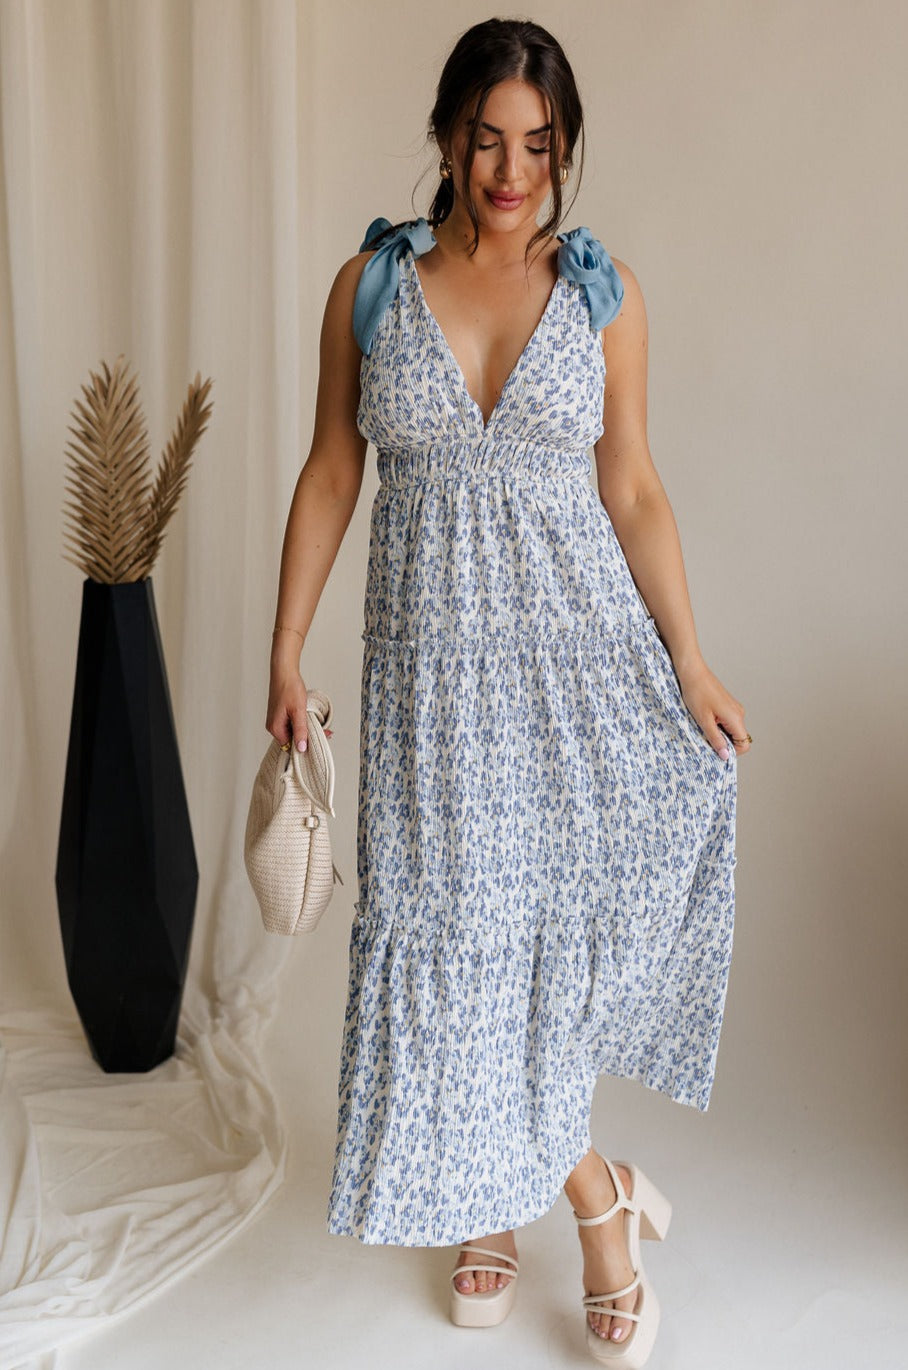 Full body view of female model wearing the Palmer Ivory & Blue Floral Tie Straps Midi Dress which features Light Blue and White Floral Print, Plisse Textured Fabric, White Lining, Tiered Body, Midi Length, Plunge Neckline and Blue Tie Straps